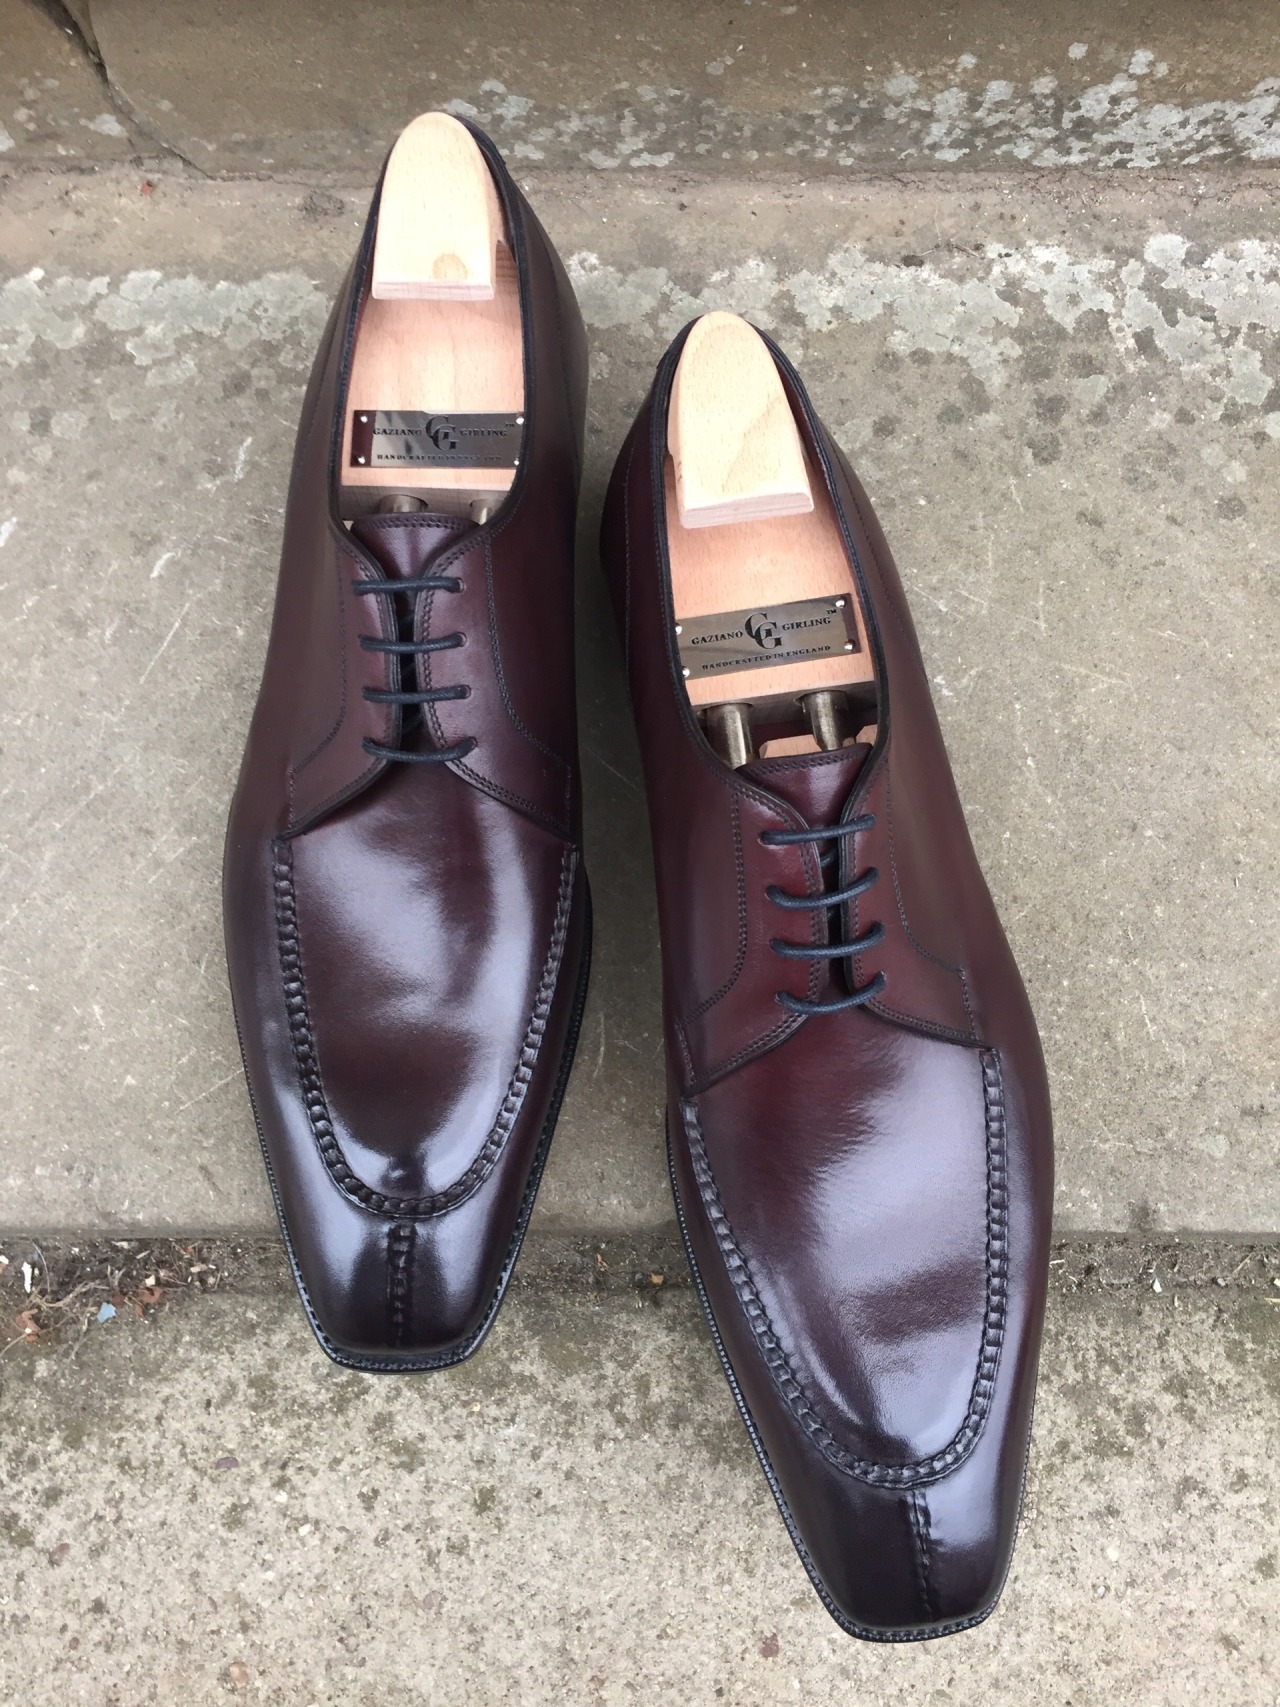 Gaziano & Girling — Hove in Vintage Rioja Calf on the TG73 Last